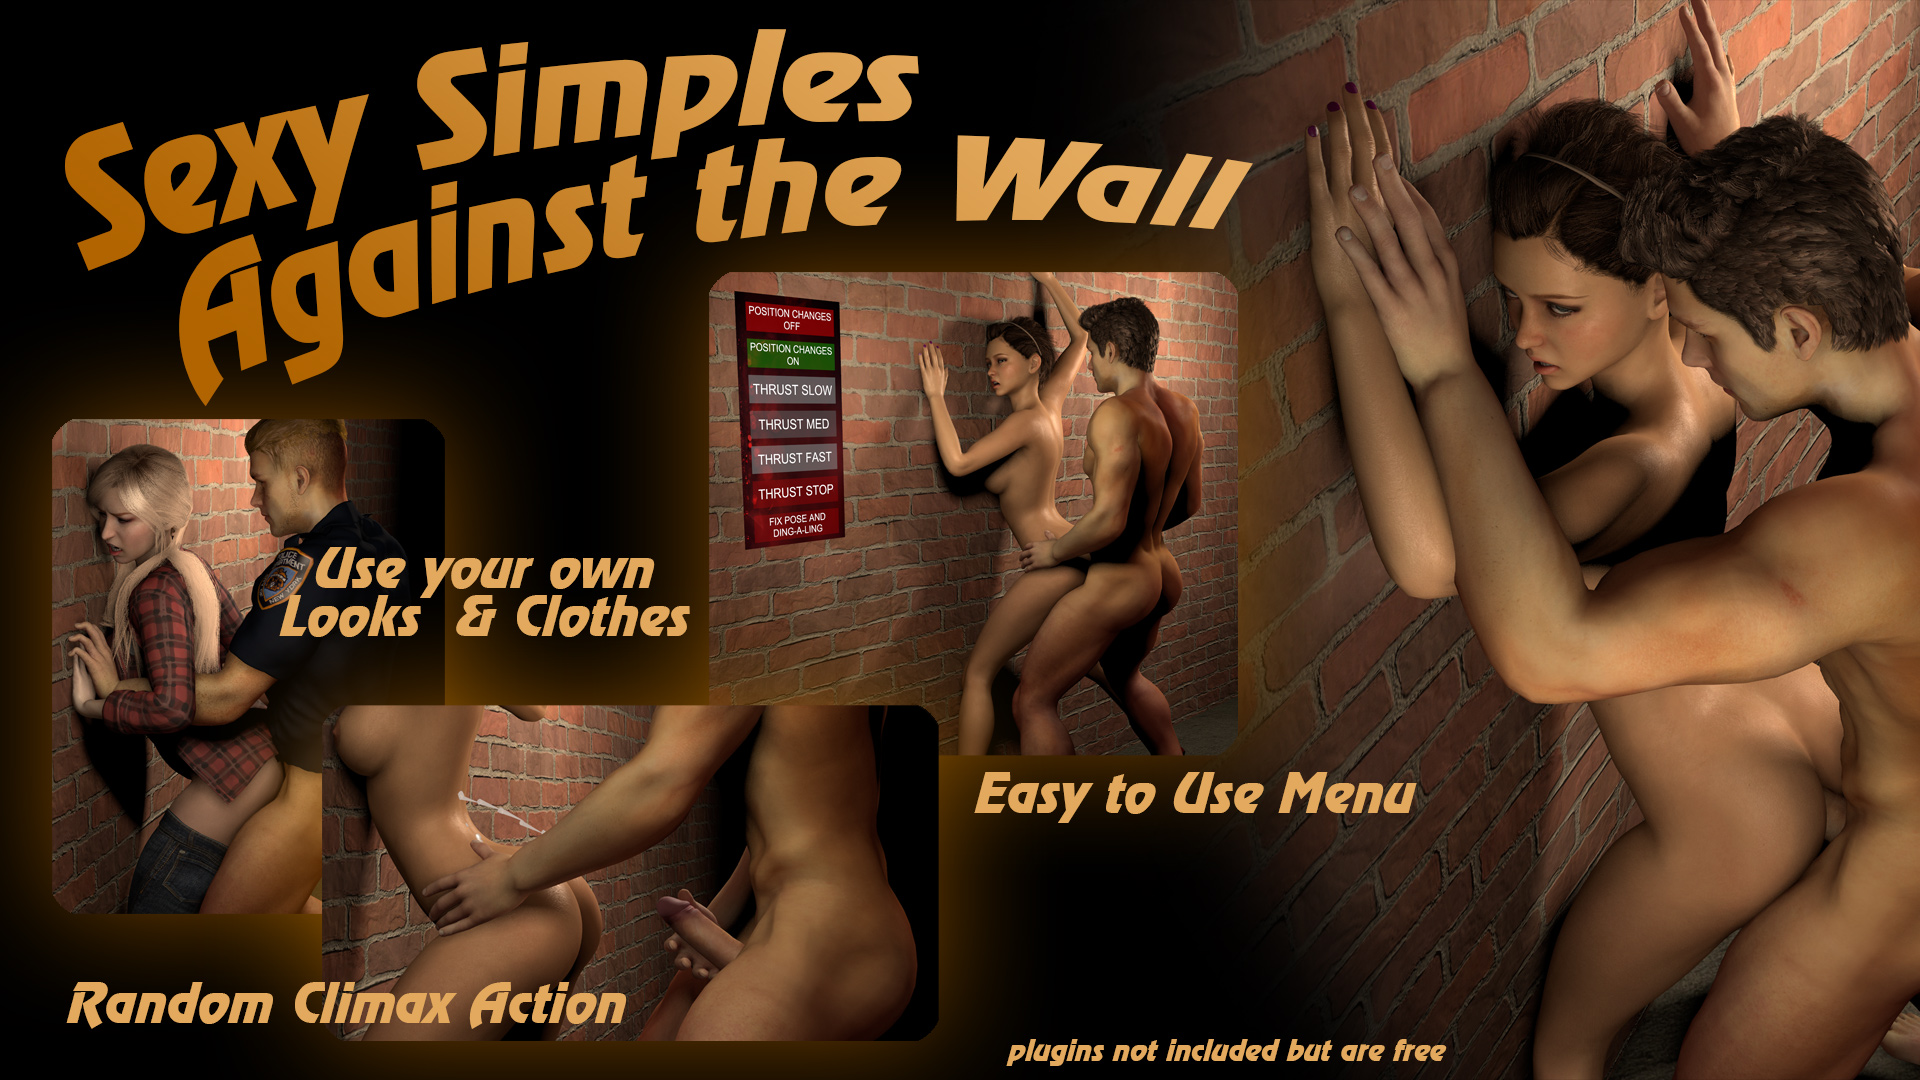 Sexy Simples Against the Wall.jpg